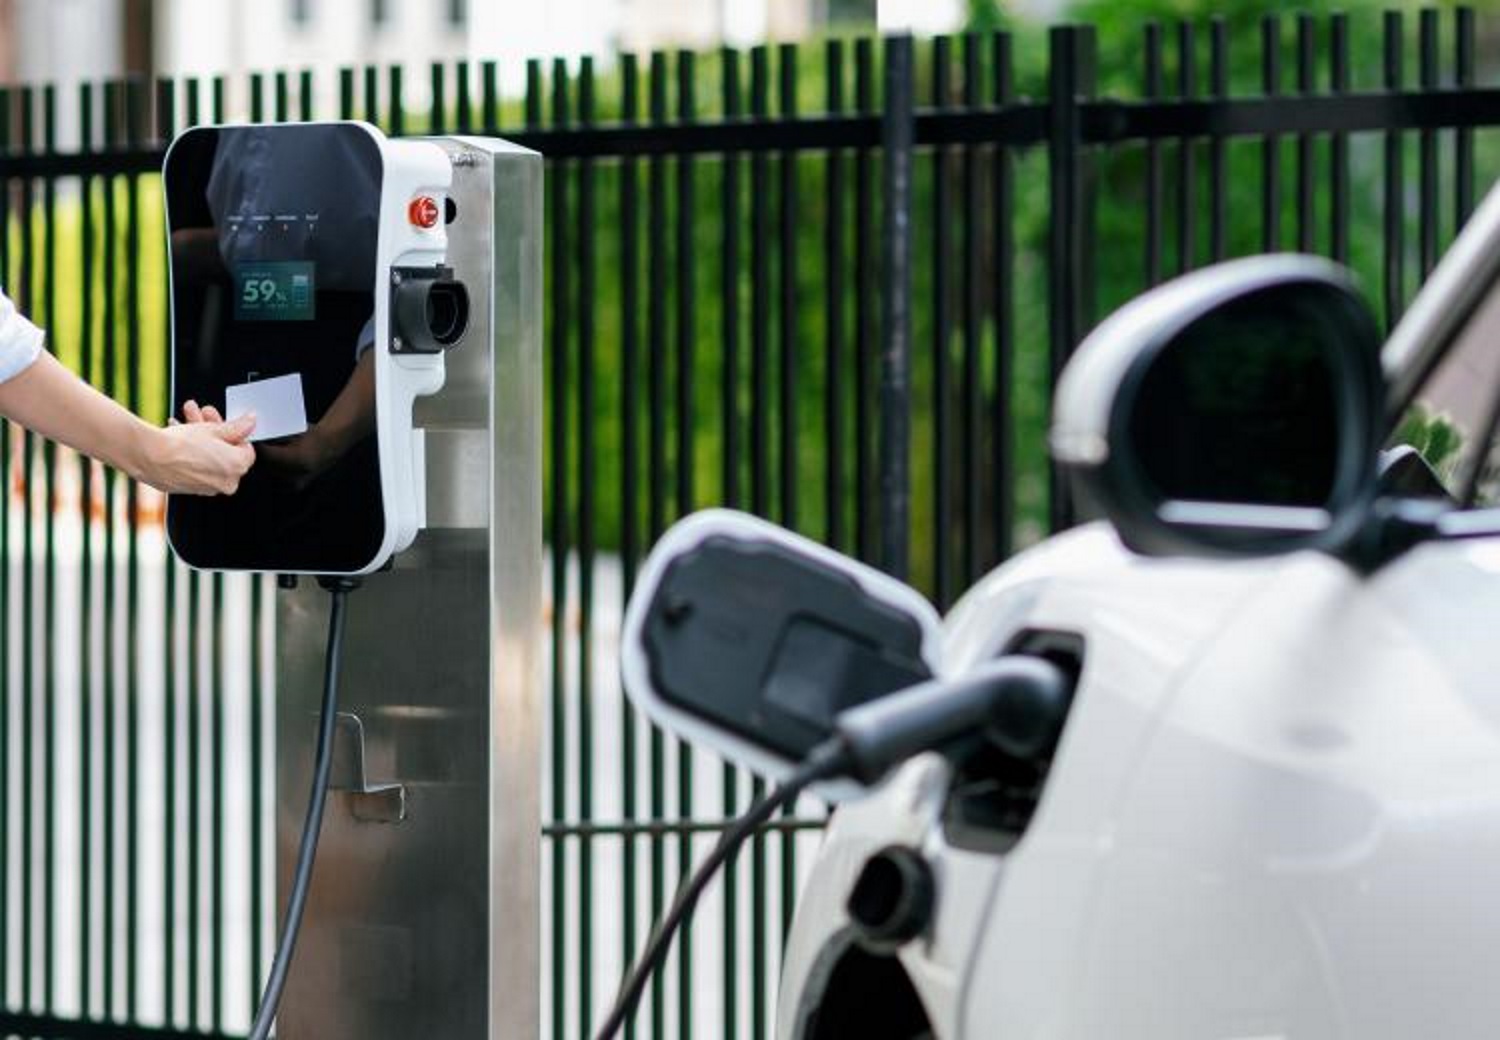 Understanding the Need for PIN - By Solving the Challenge of Payment at EV Chargers